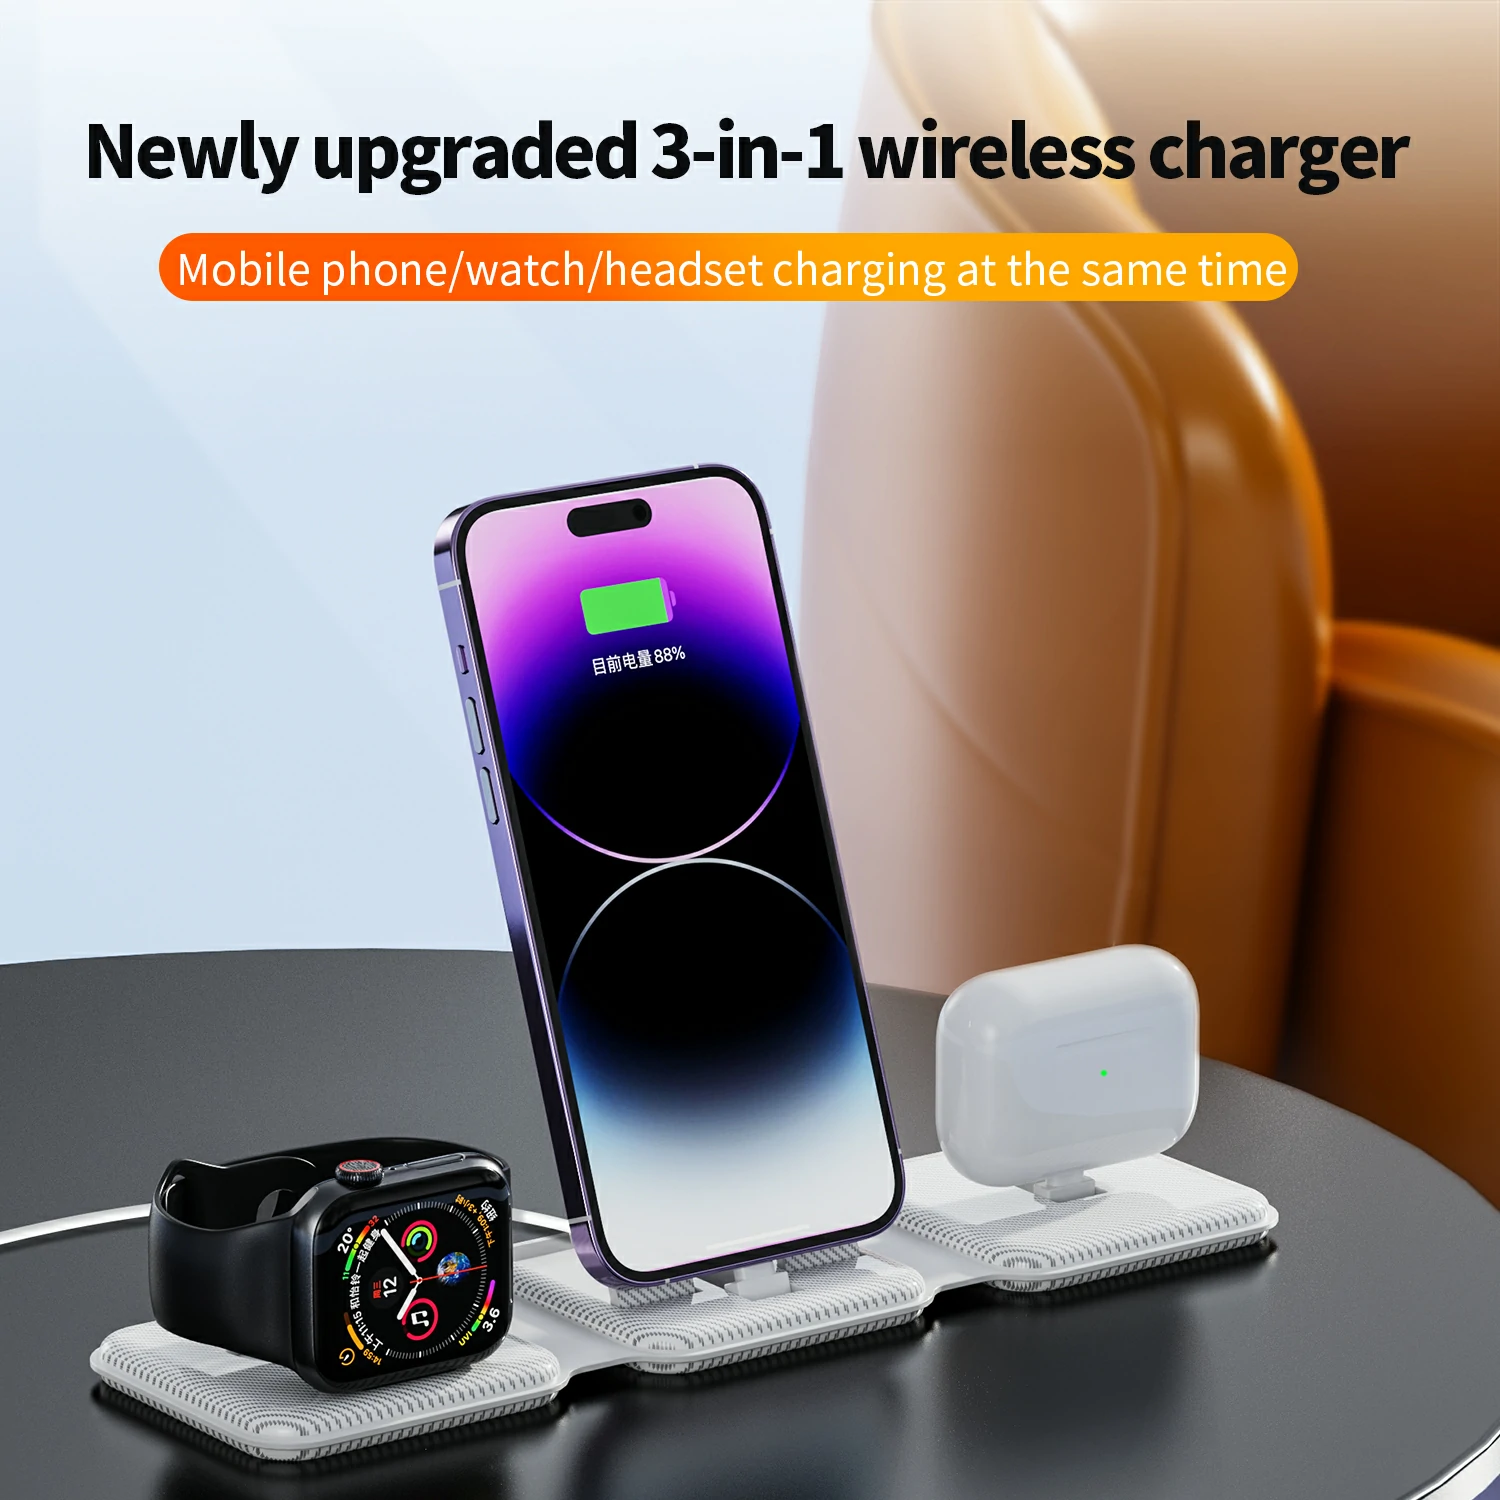 WOWTECHPROMOS: Foldable 3-in-1 Wireless Charger - Compact, Fast & Multi-Device Ready